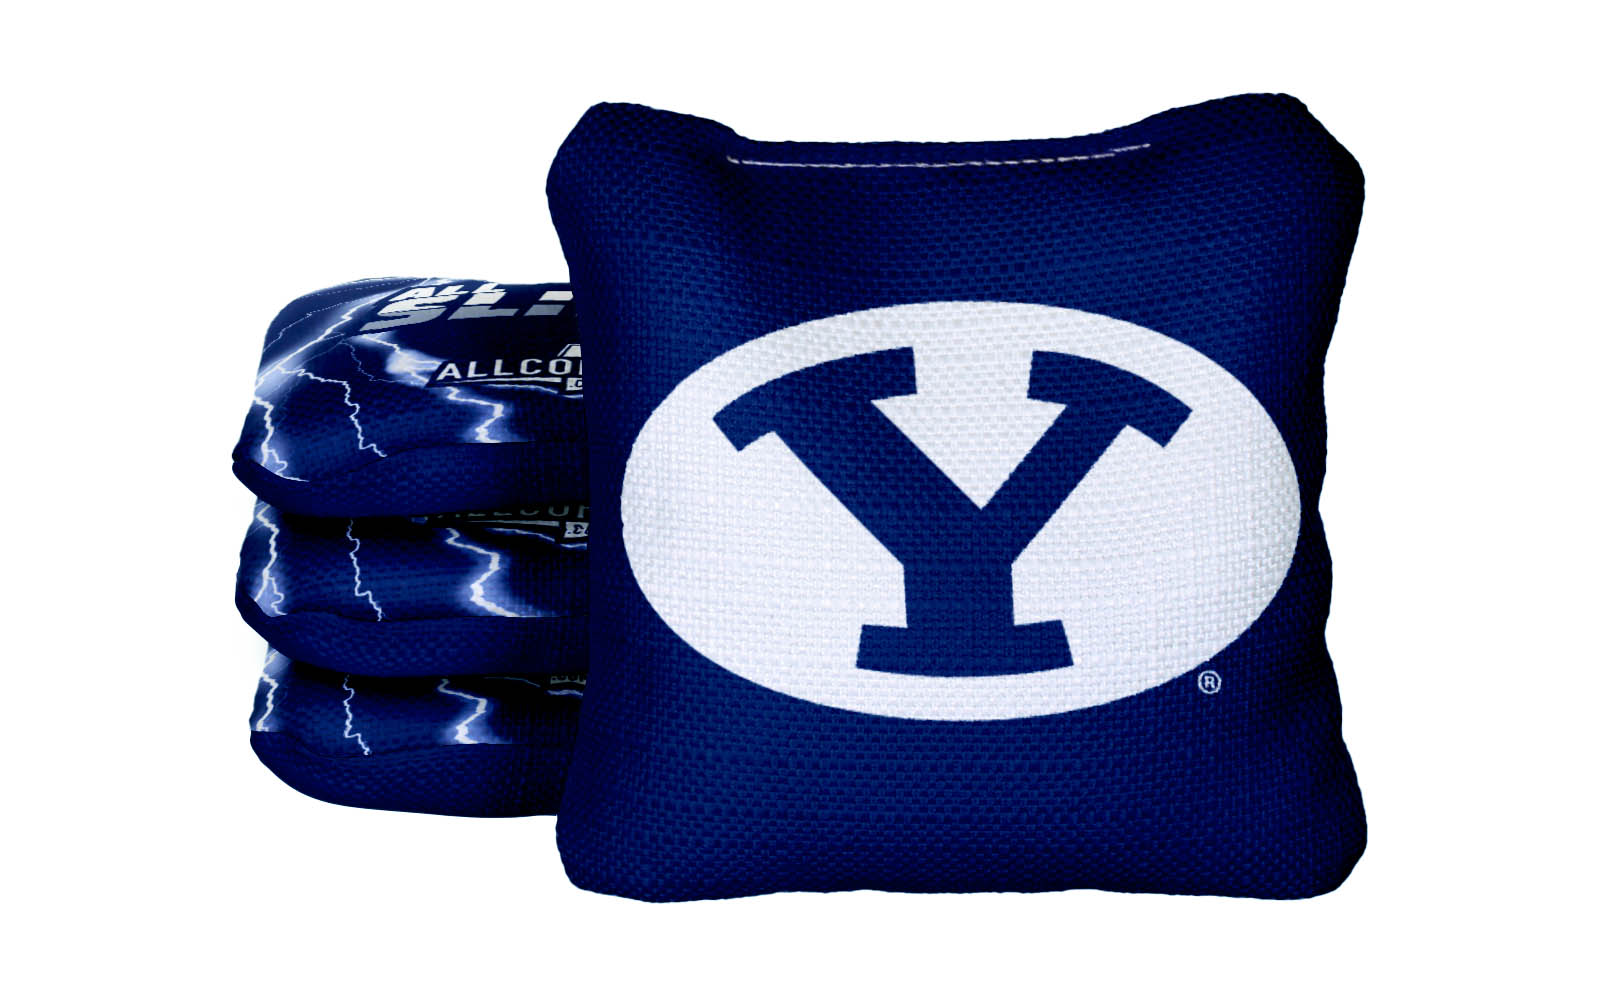 Officially Licensed Collegiate Cornhole Bags - All-Slide 2.0 - Set of 4 - BYU